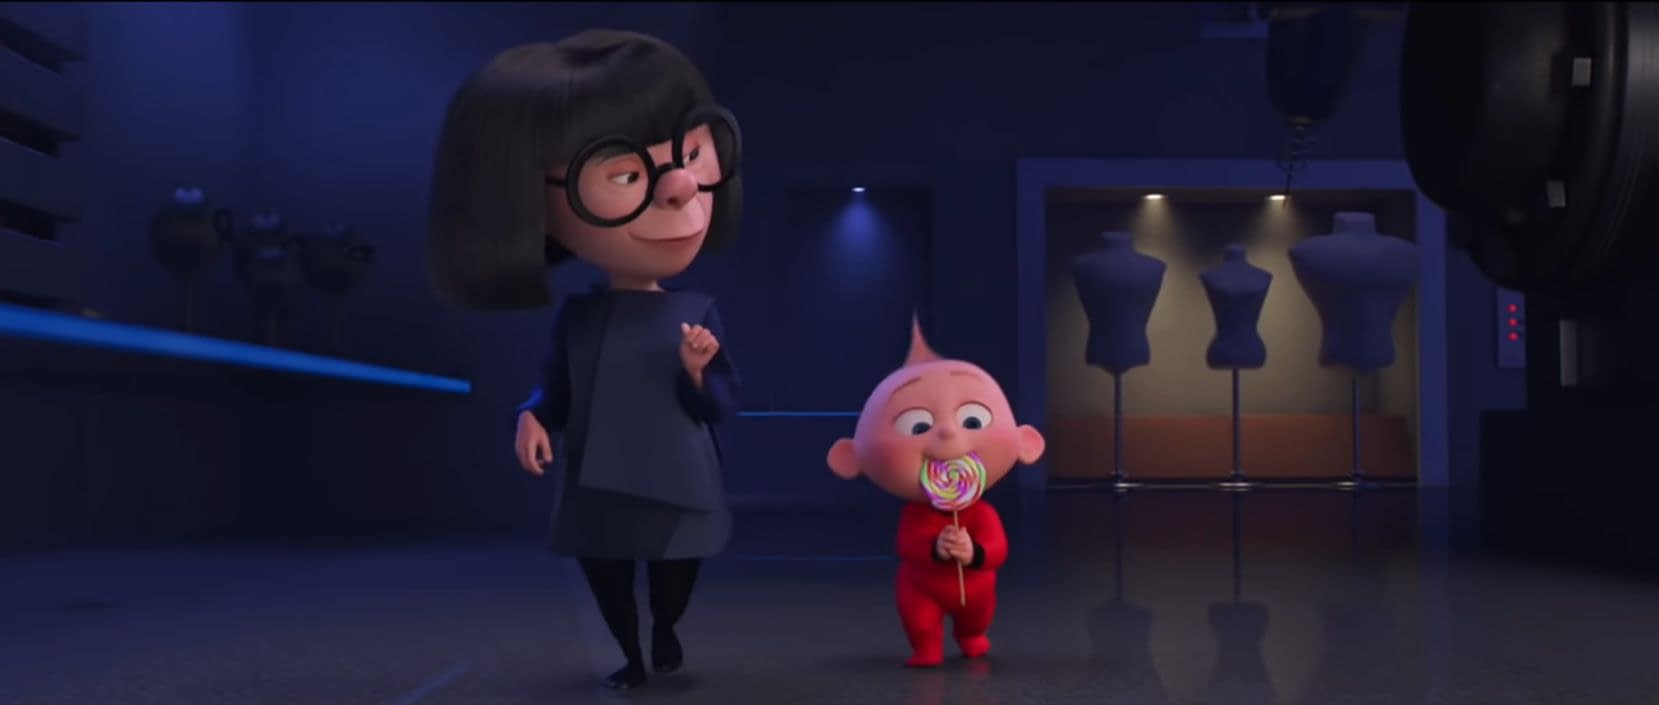 Disney Pixar Incredibles 2 Edna Mode Accept With Boldness Ta - Inspire  Uplift